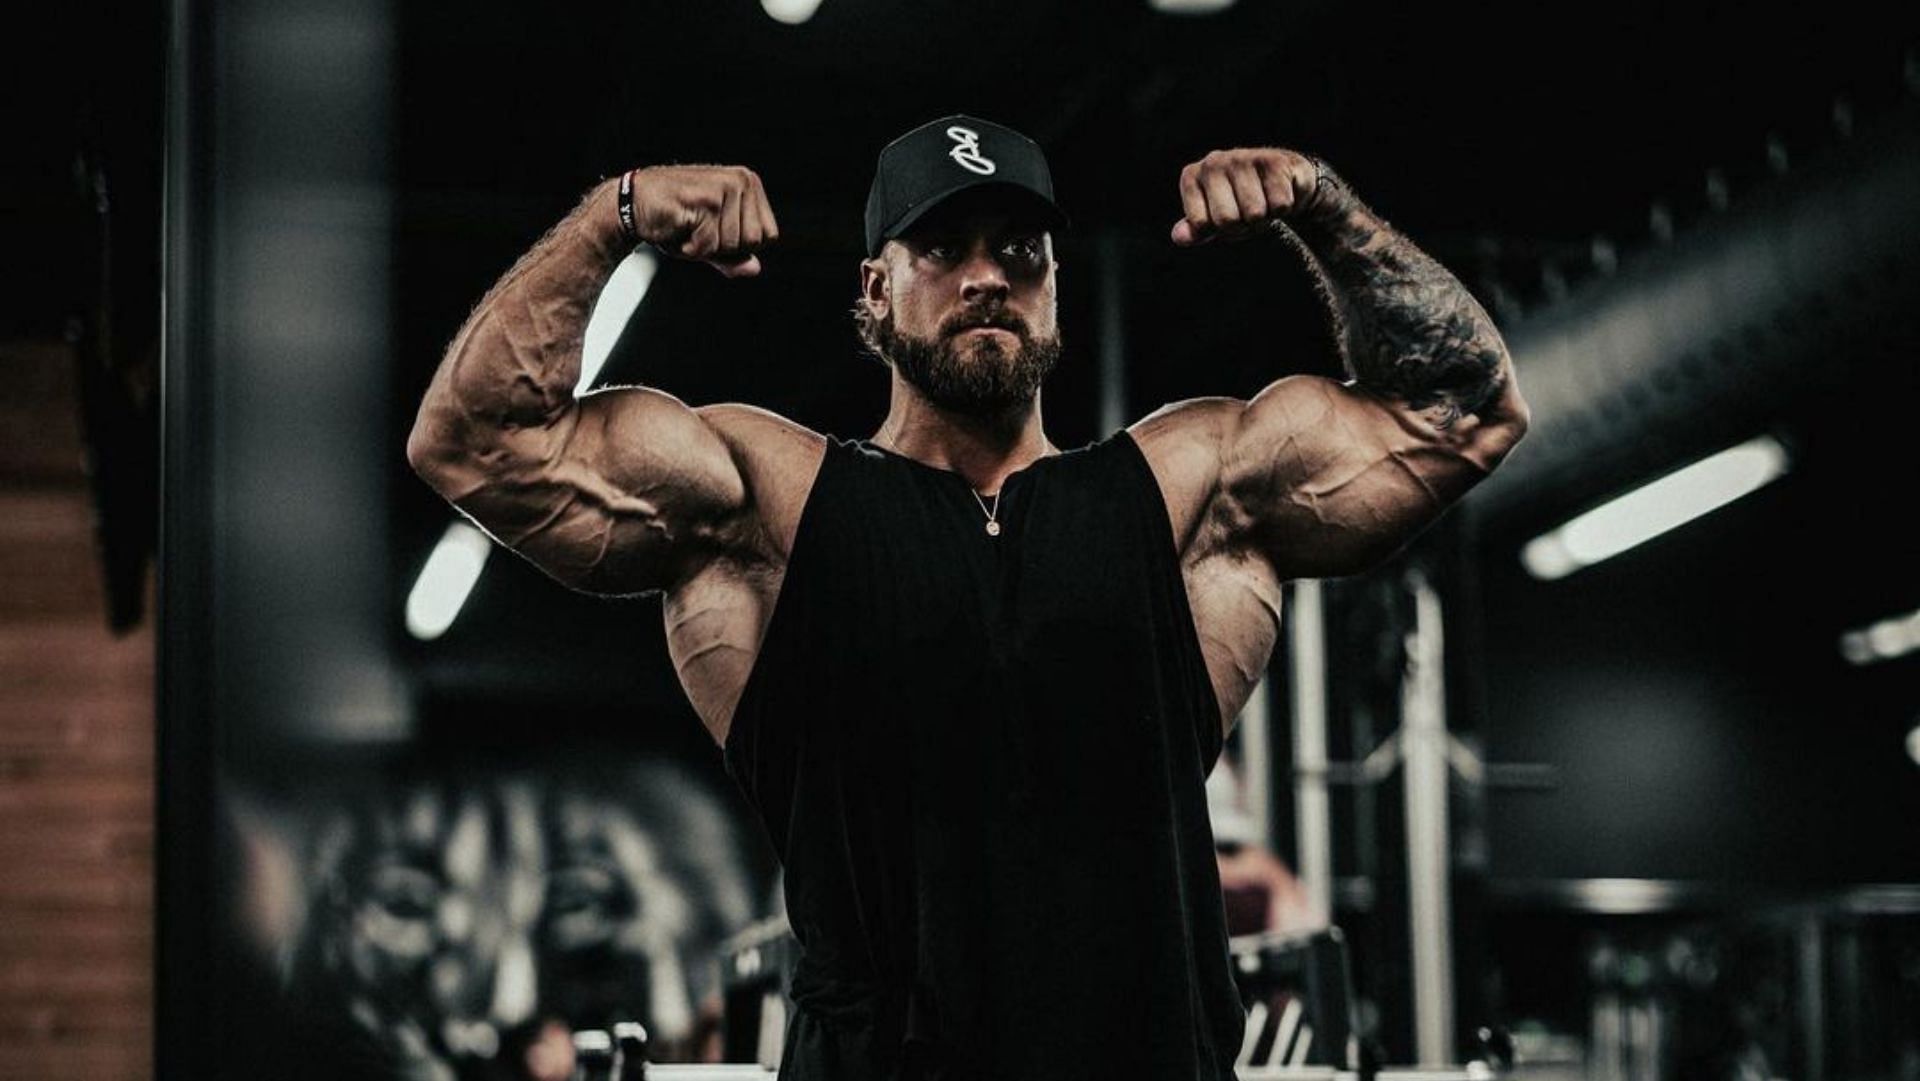 Chris Bumstead shares his bicep workout routine. (Photo via Chris Bumstead